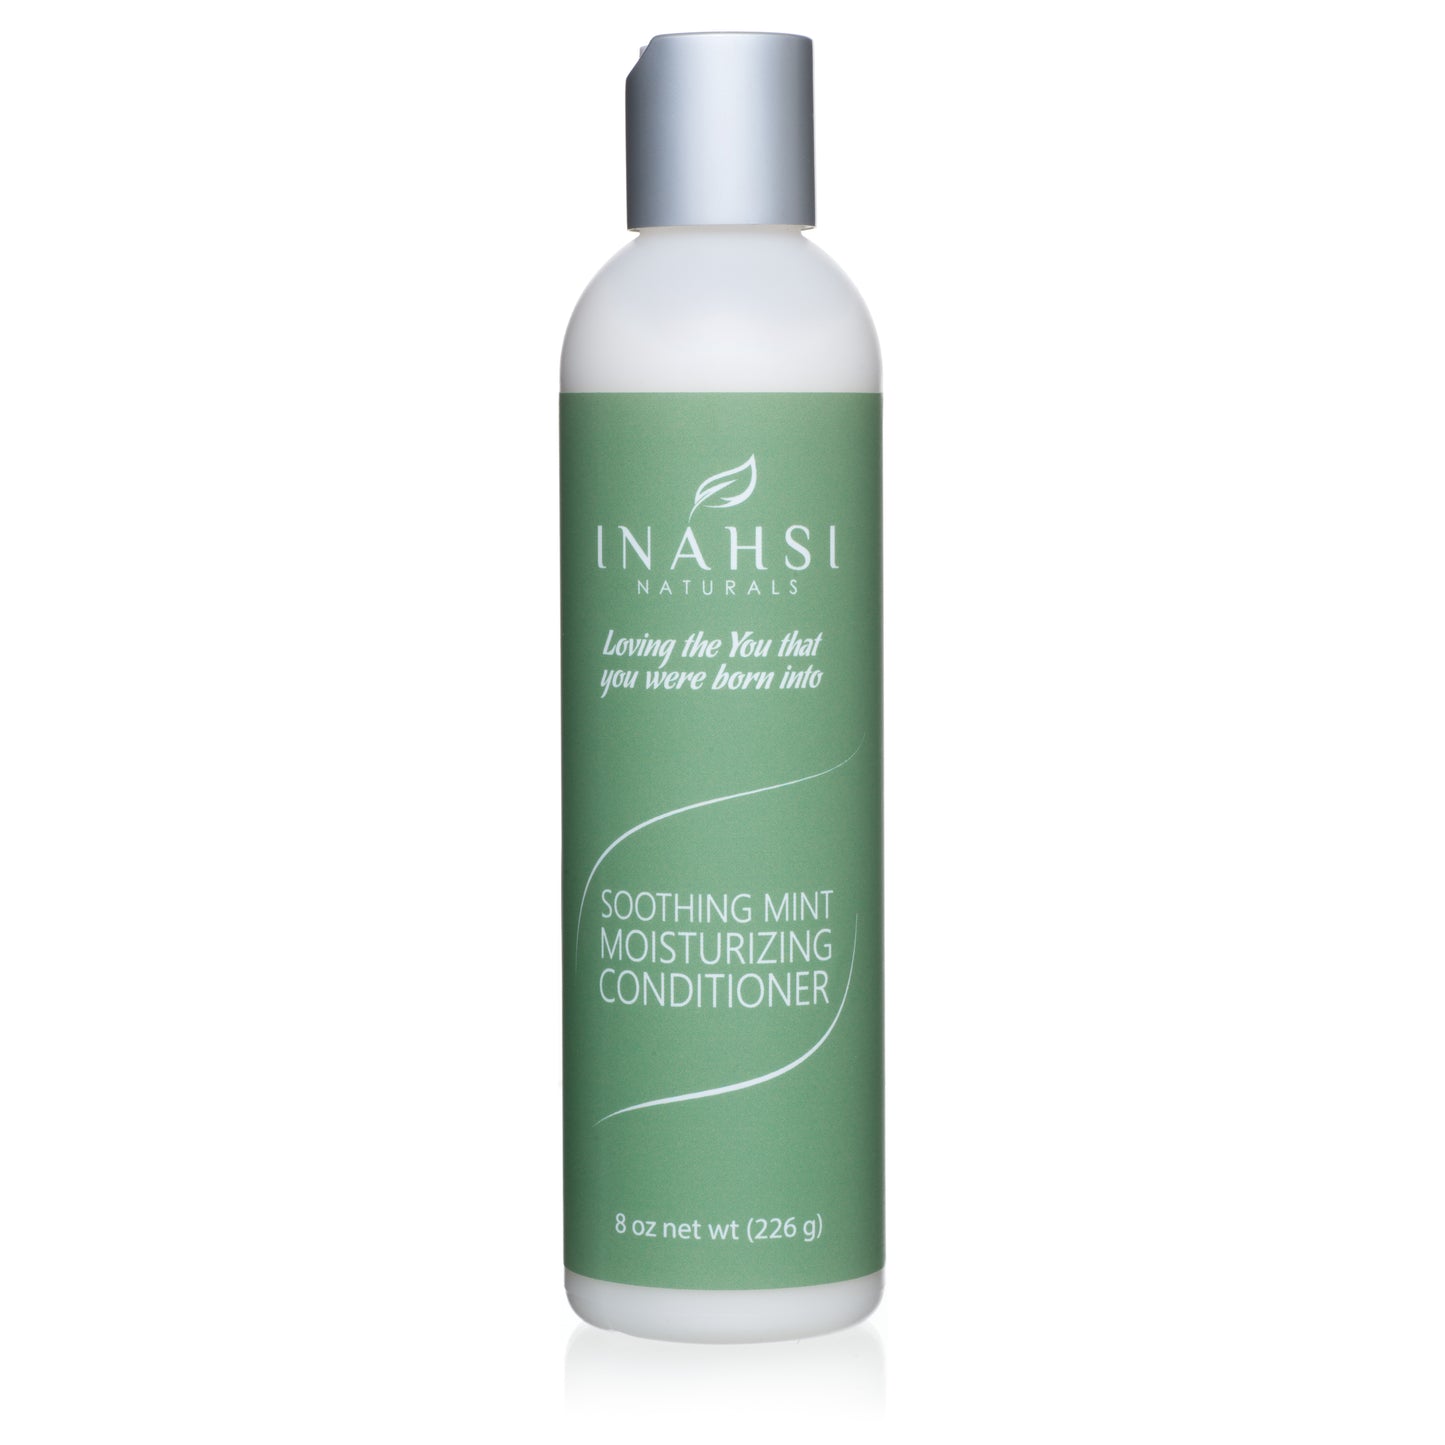 Inahsi Naturals - Soothing Mint Moisturizing Conditioner 226gr